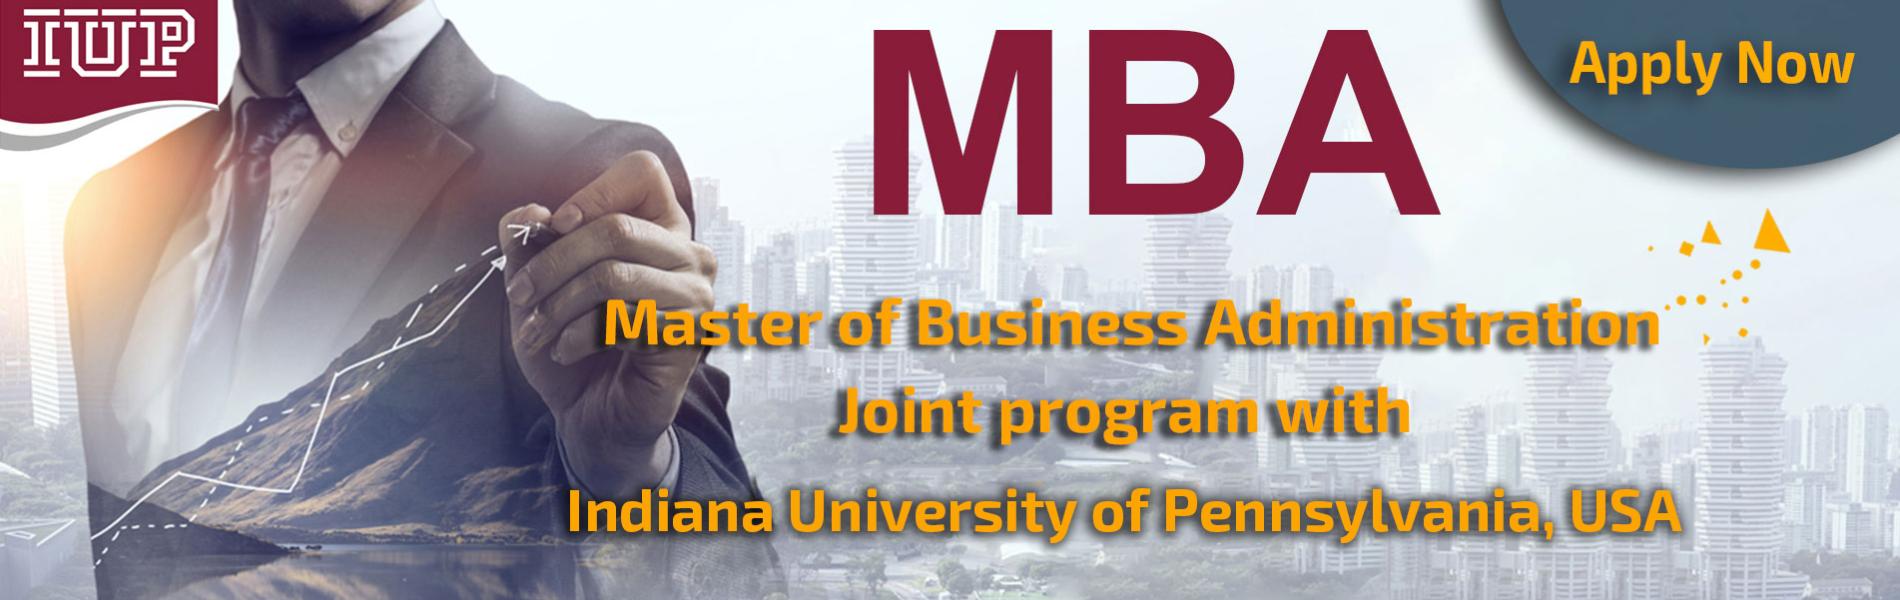 Start Accepting Applications for the Joint Master of Business Administration (MBA) Program with Indi